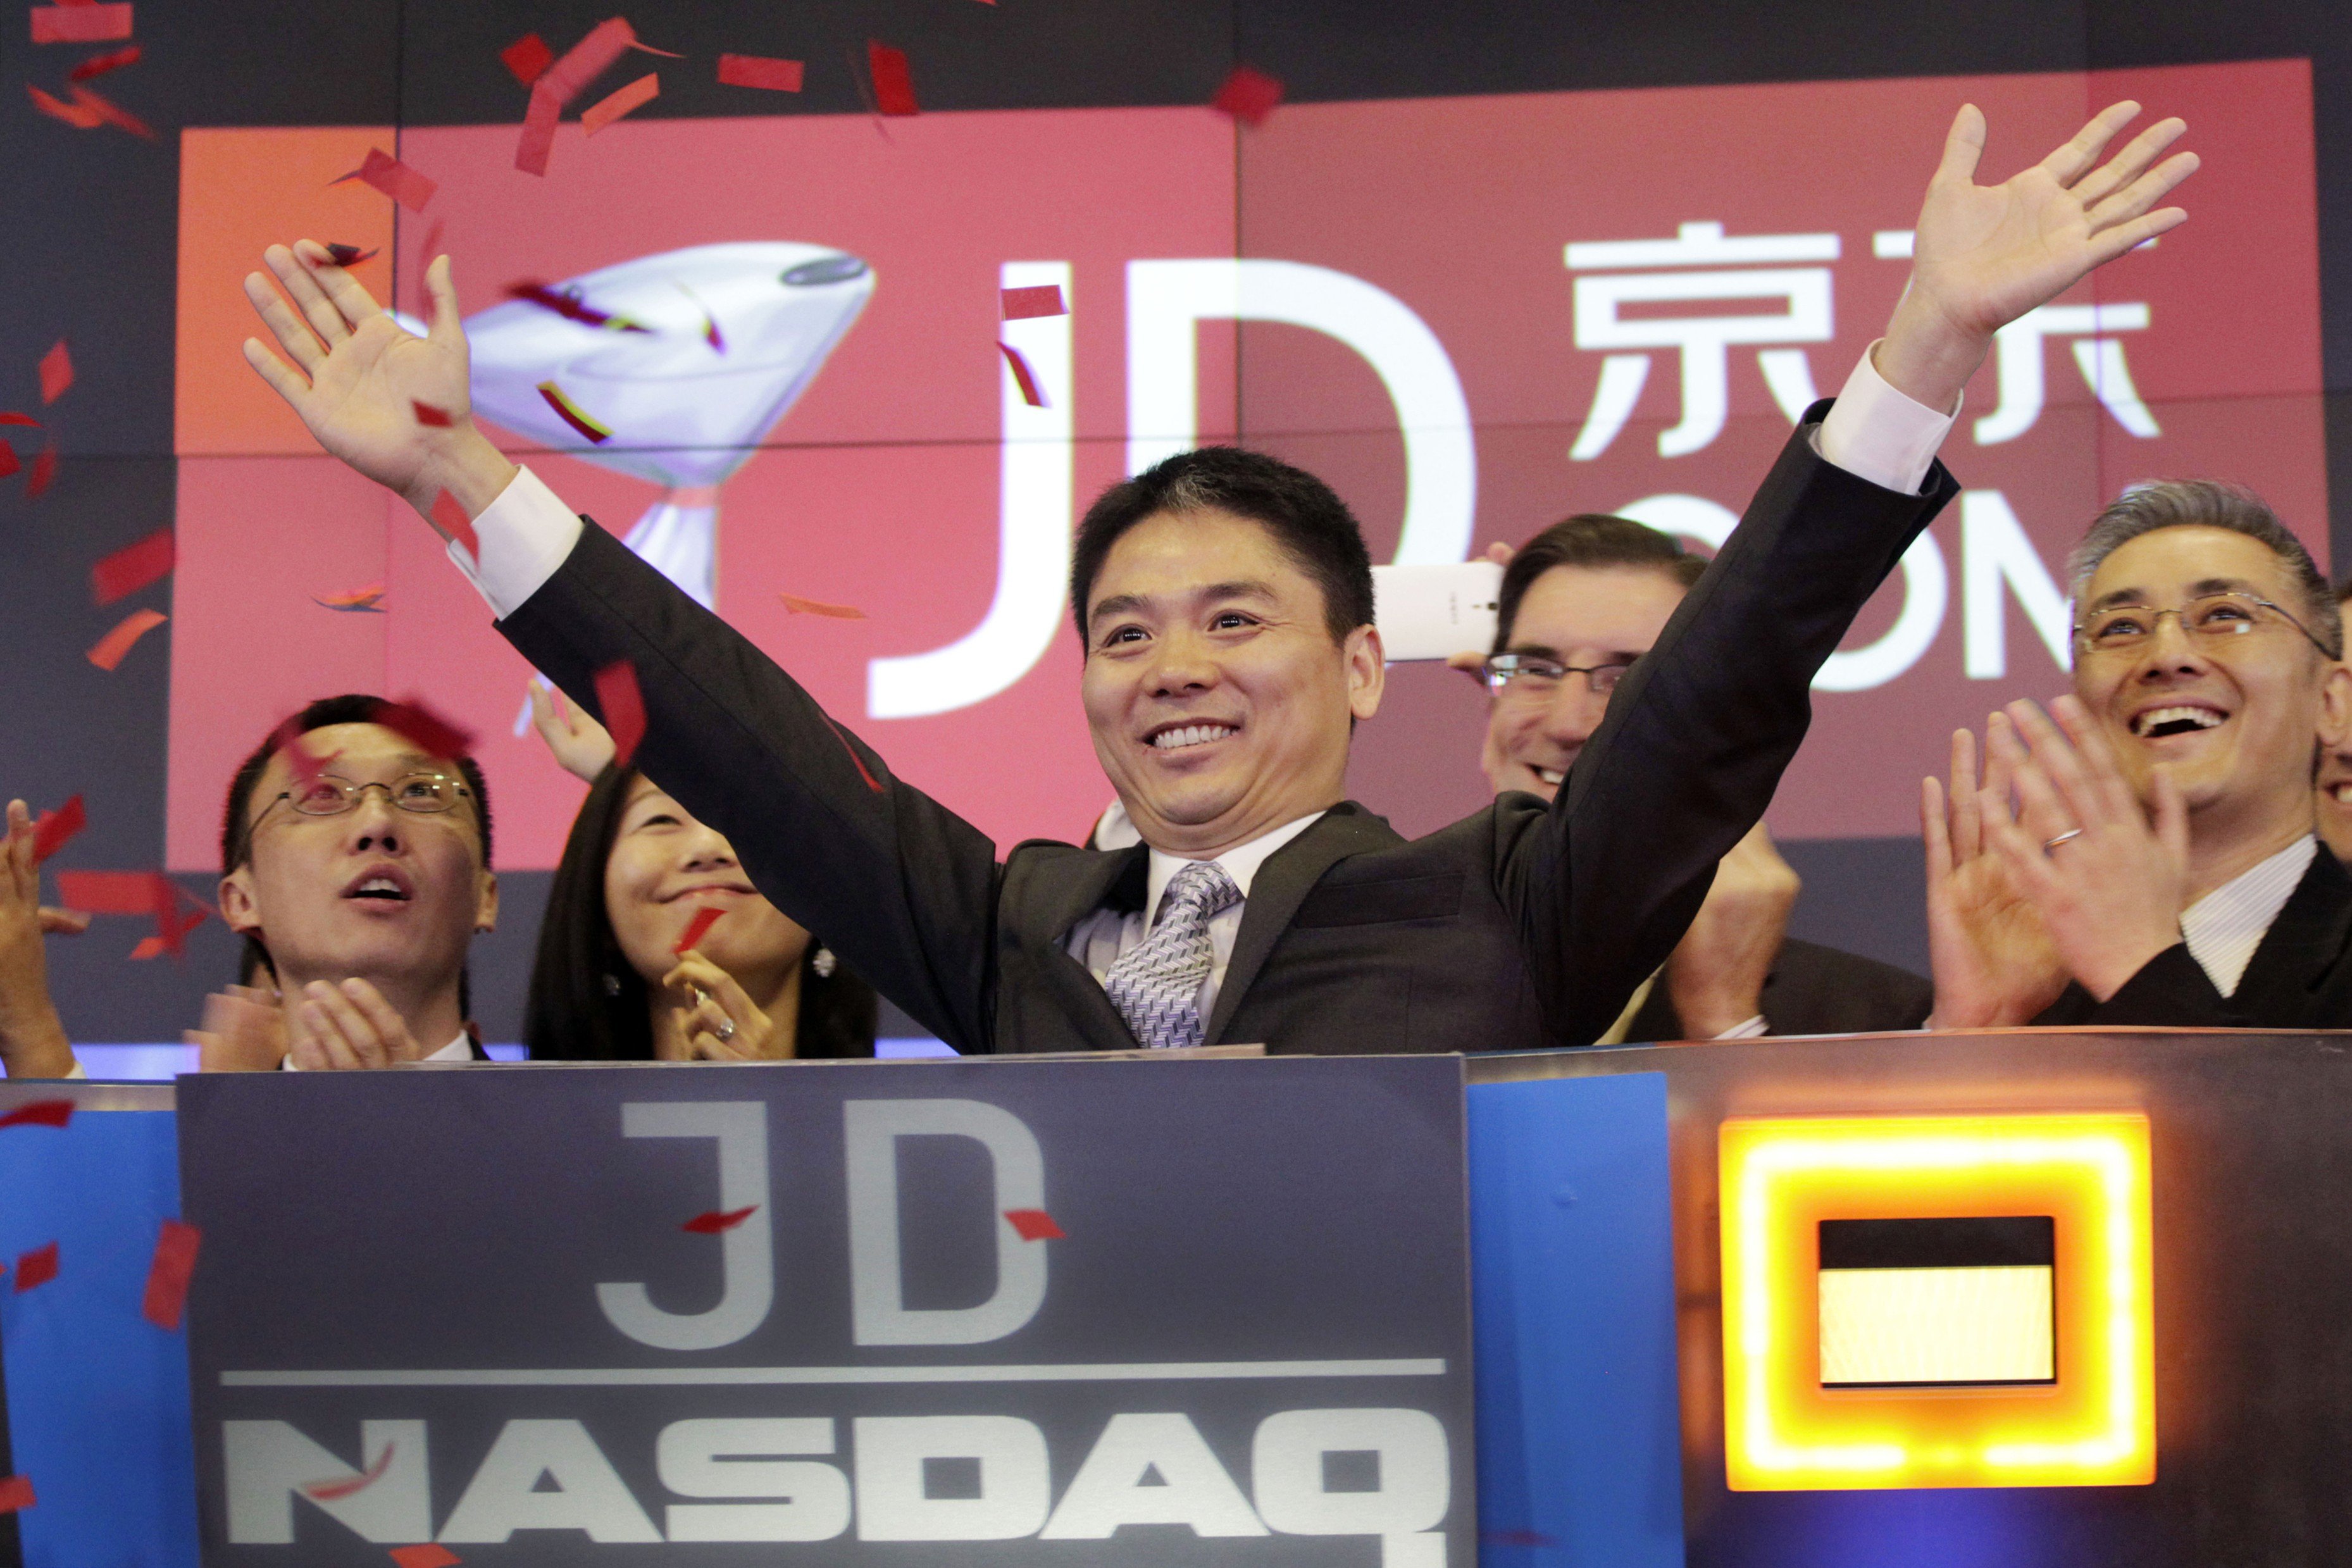 Richard Liu, CEO of JD.com, celebrates the company’s initial public offering in May 2014. China’s encouragement of private entrepreneurship has allowed e-commerce companies such as JD.com, Alibaba and Tencent to swiftly establish themselves as global leaders in innovation. Photo: AP